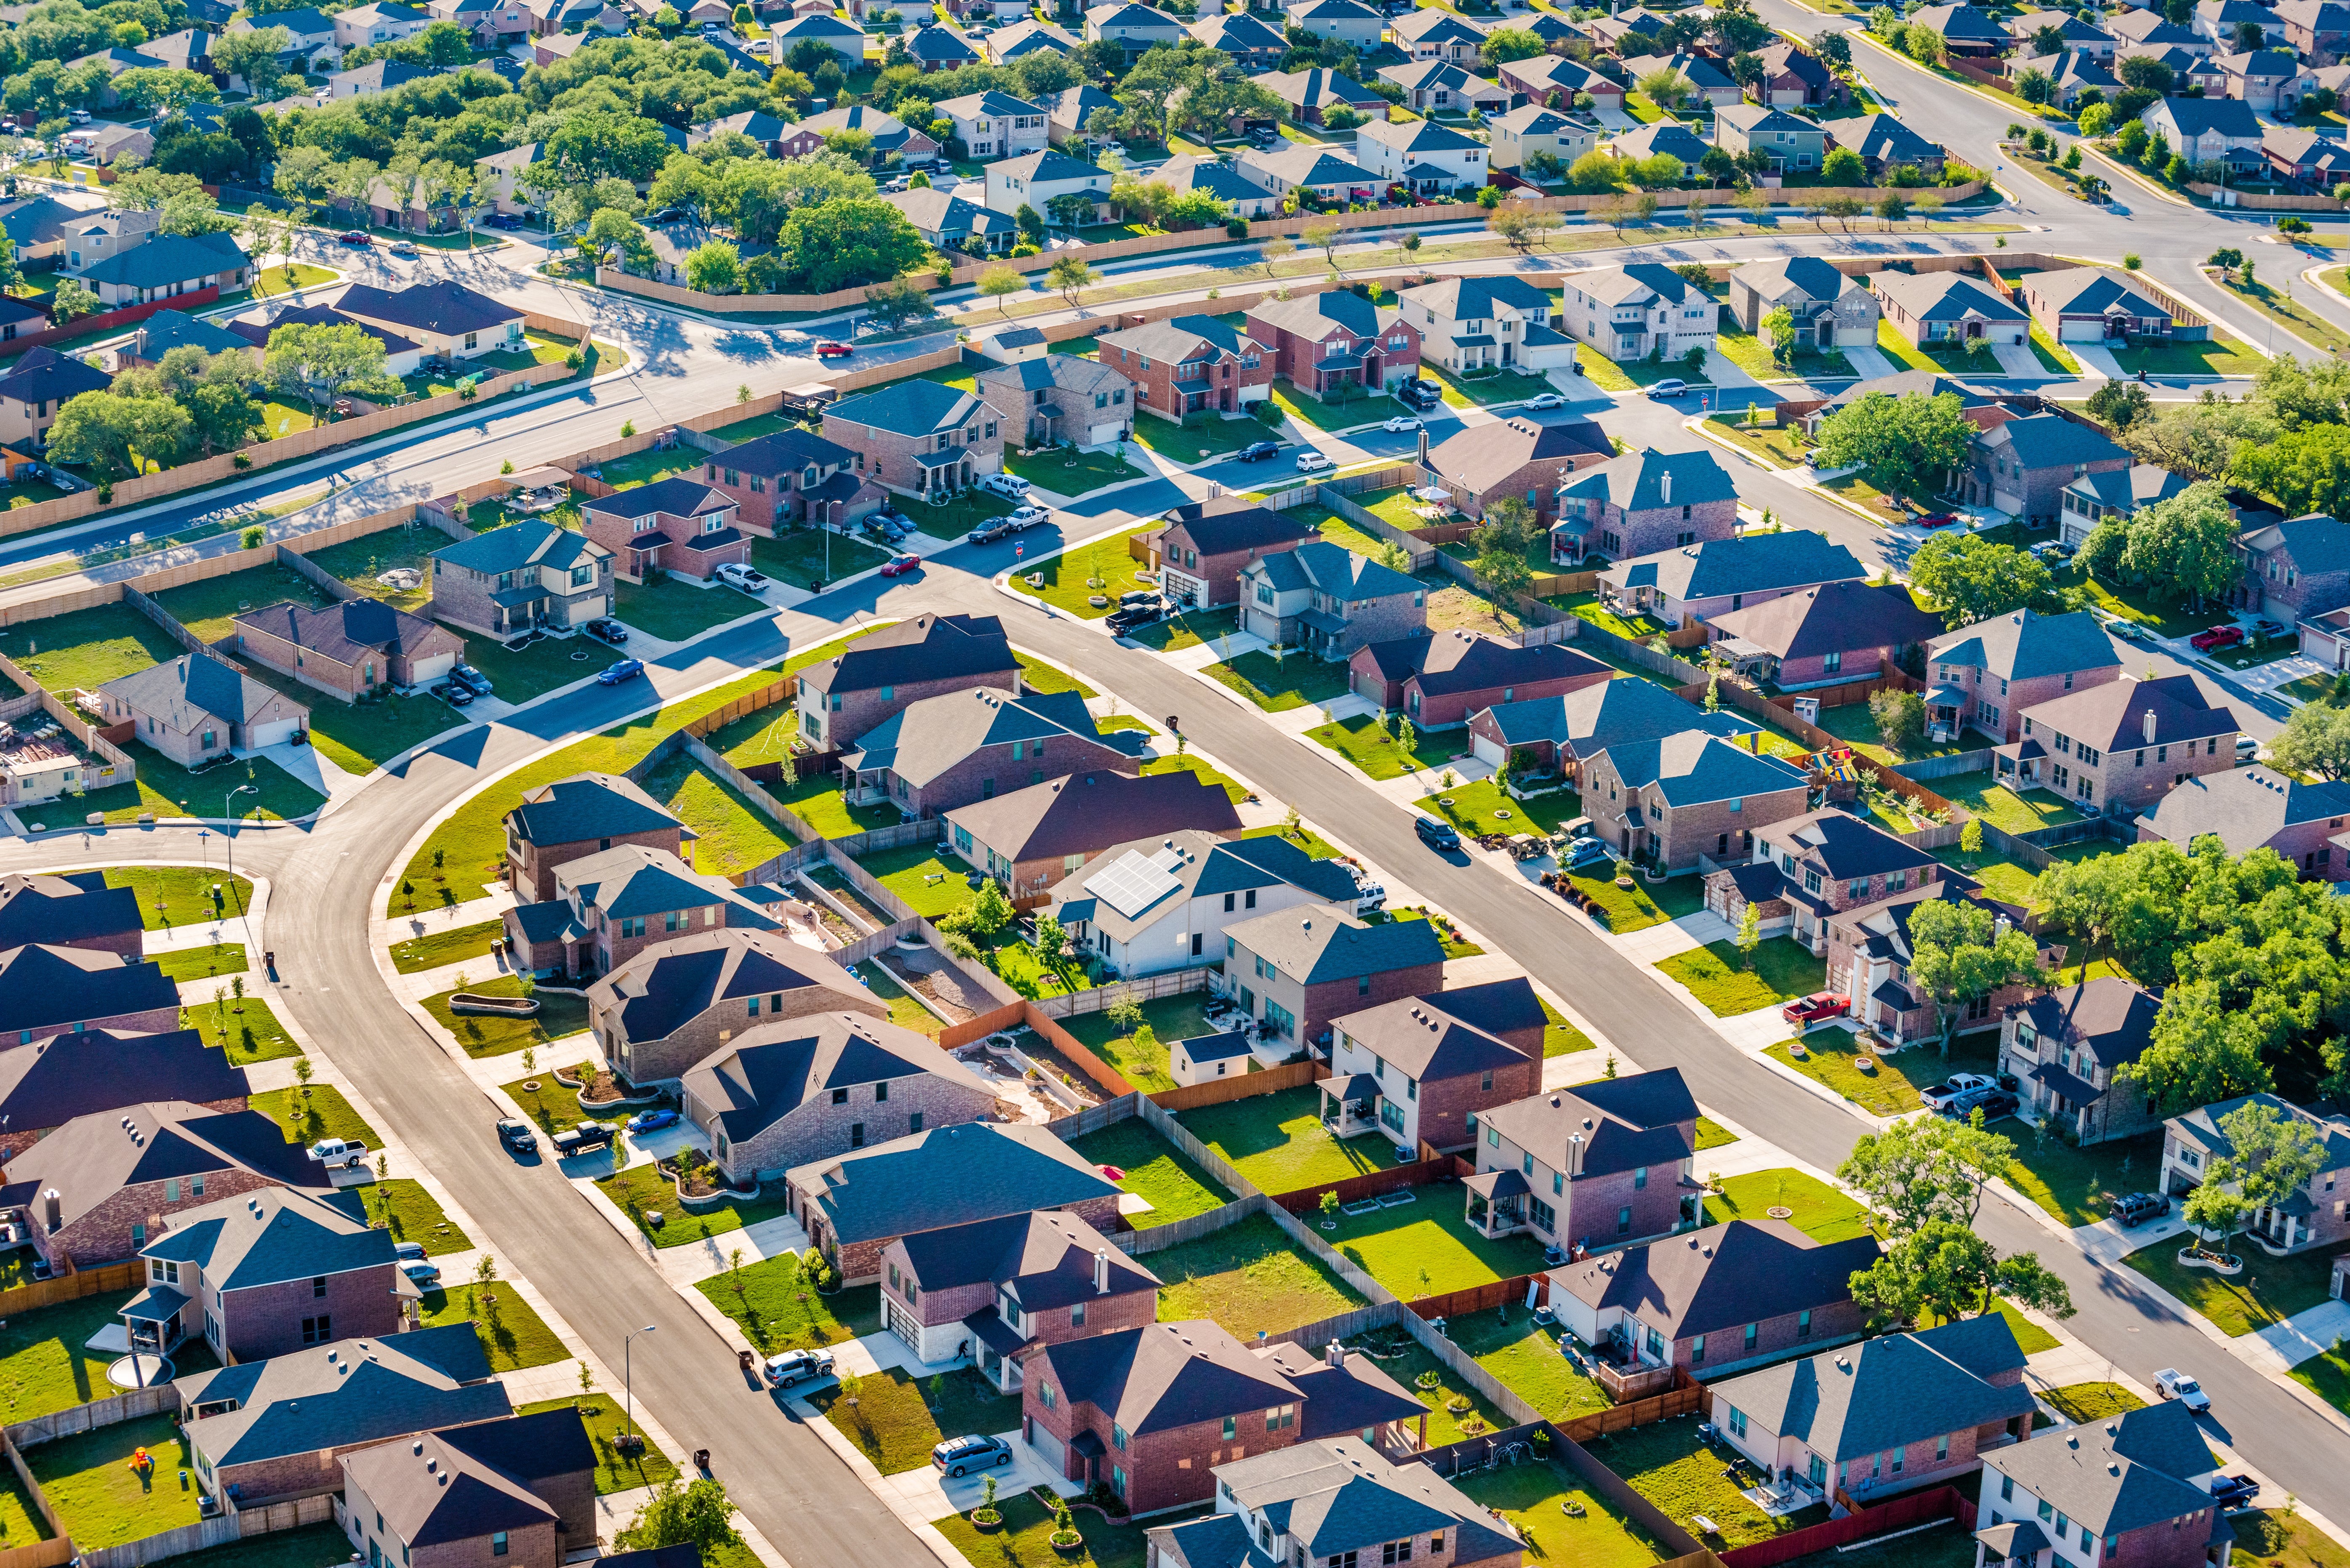 US housing data suggests that the pandemic flight to the suburbs has come to an end